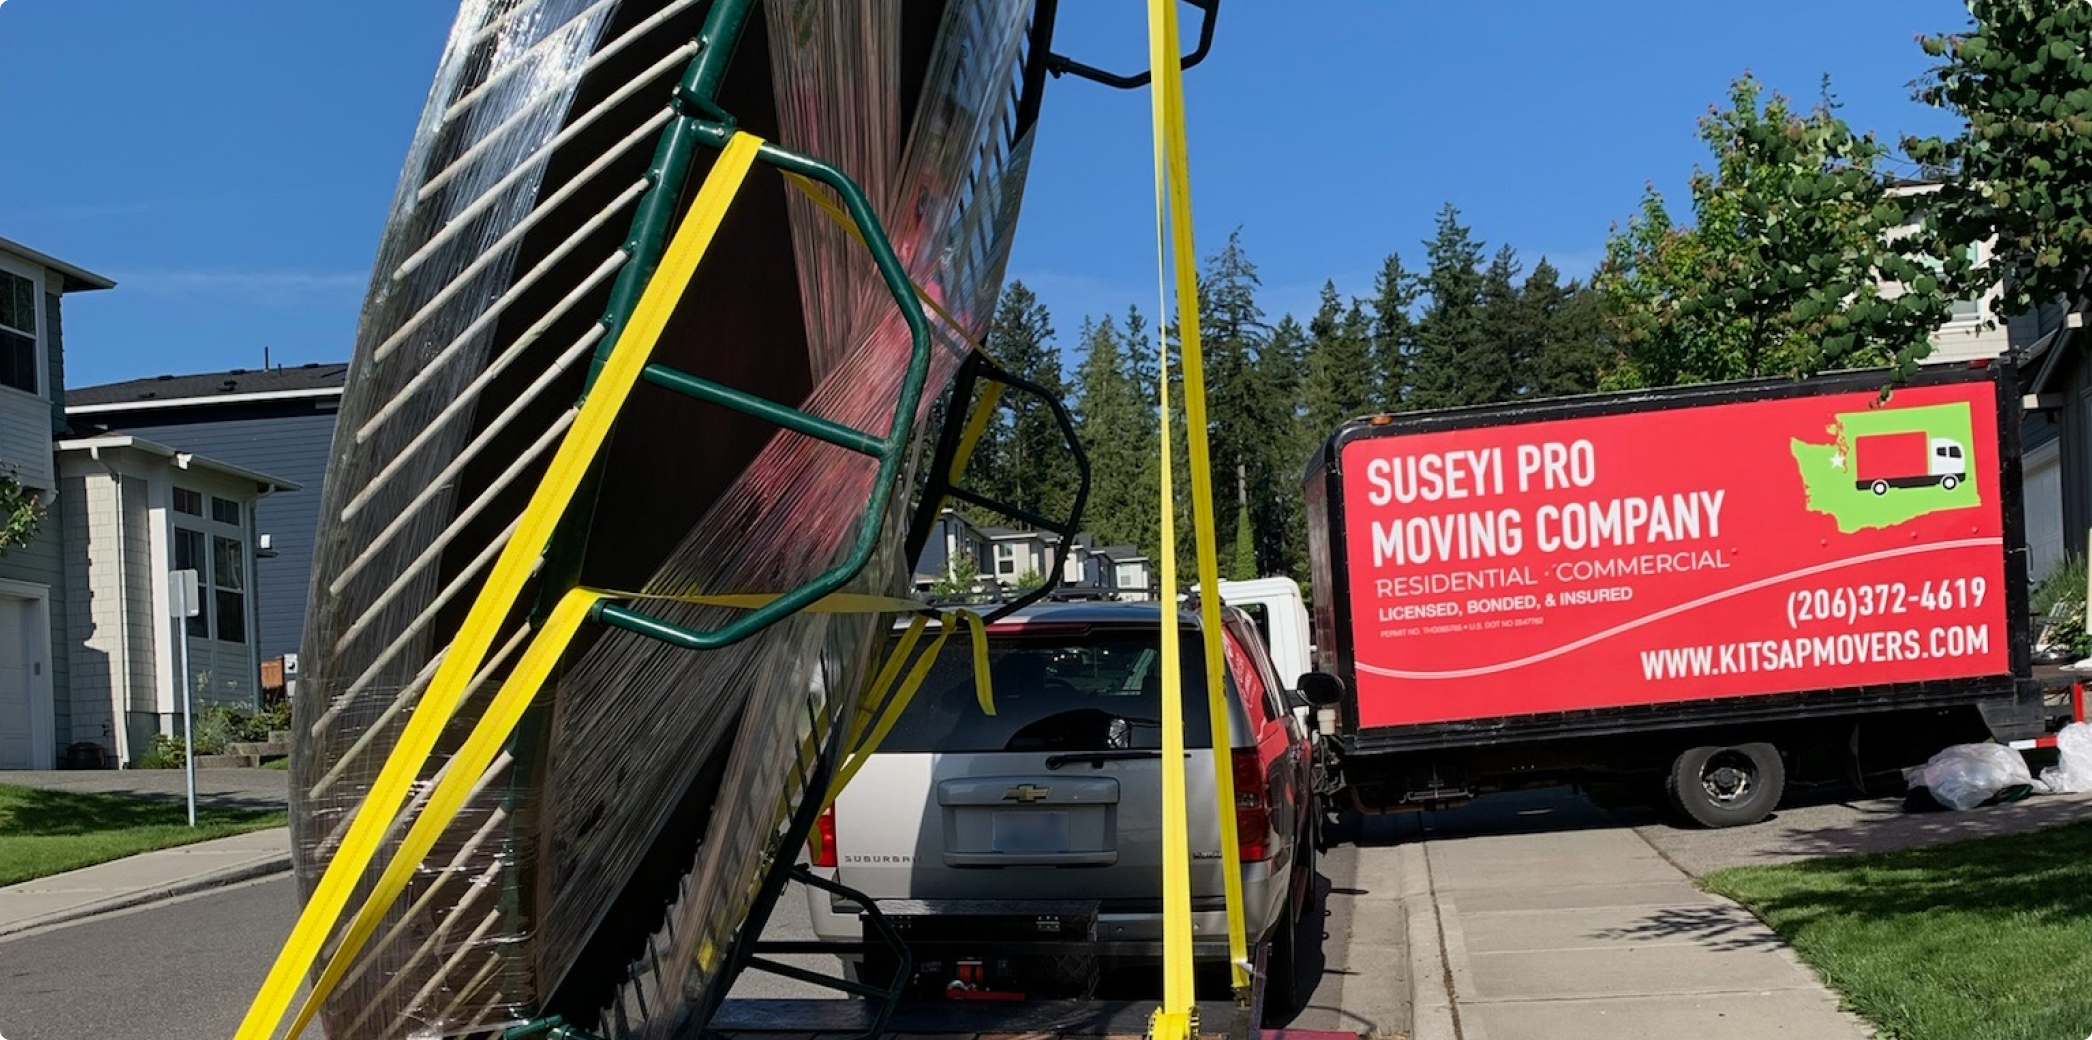 Heavy item on a Suseyi Pro Movers trailer